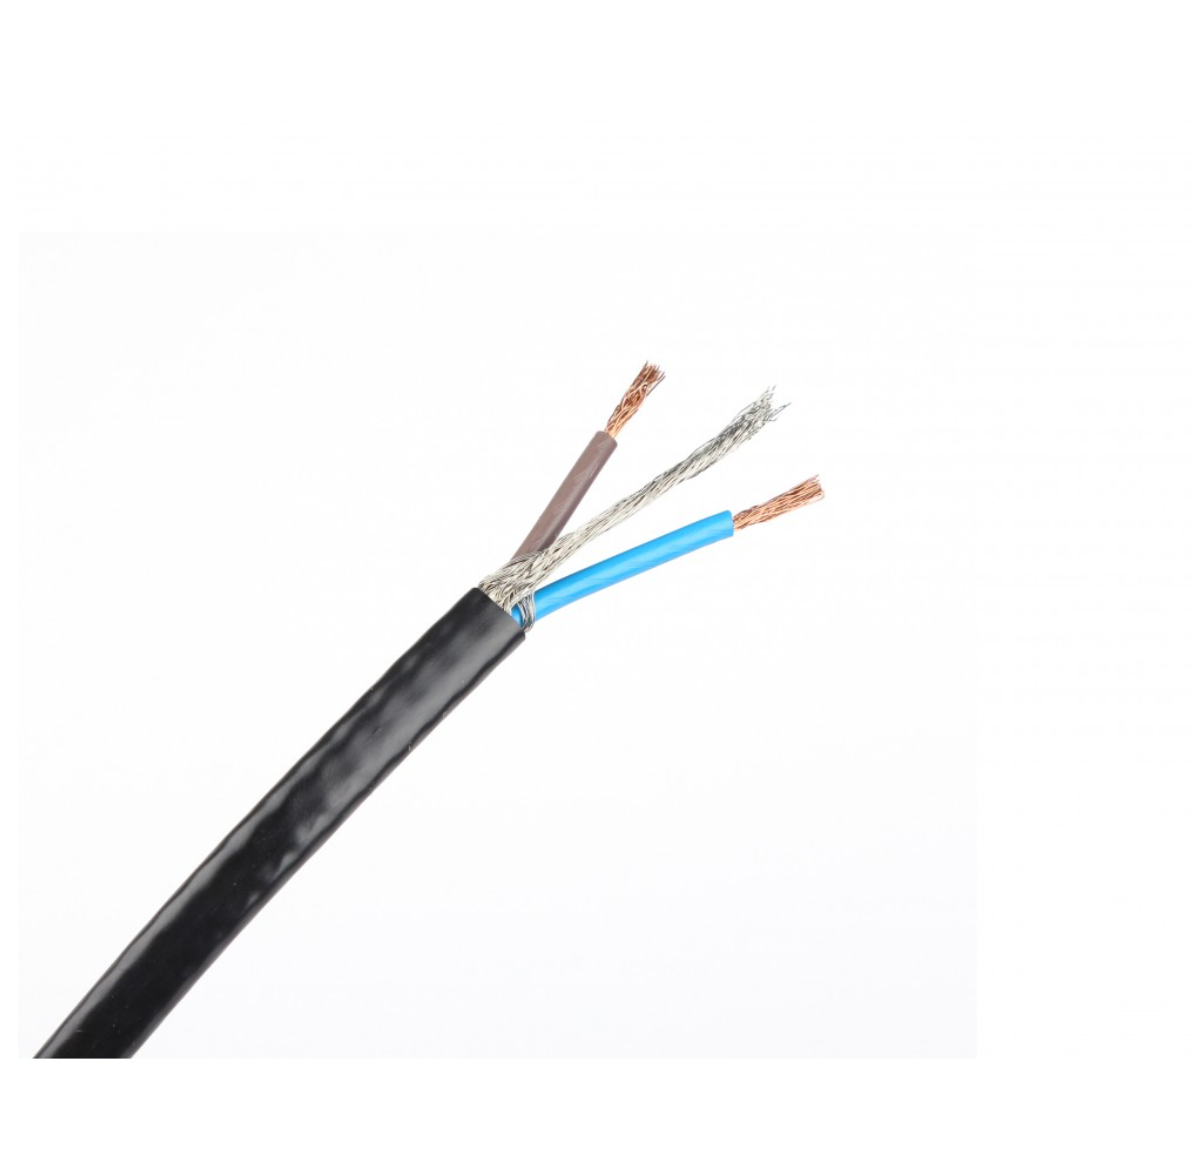 Heating cable - 15m